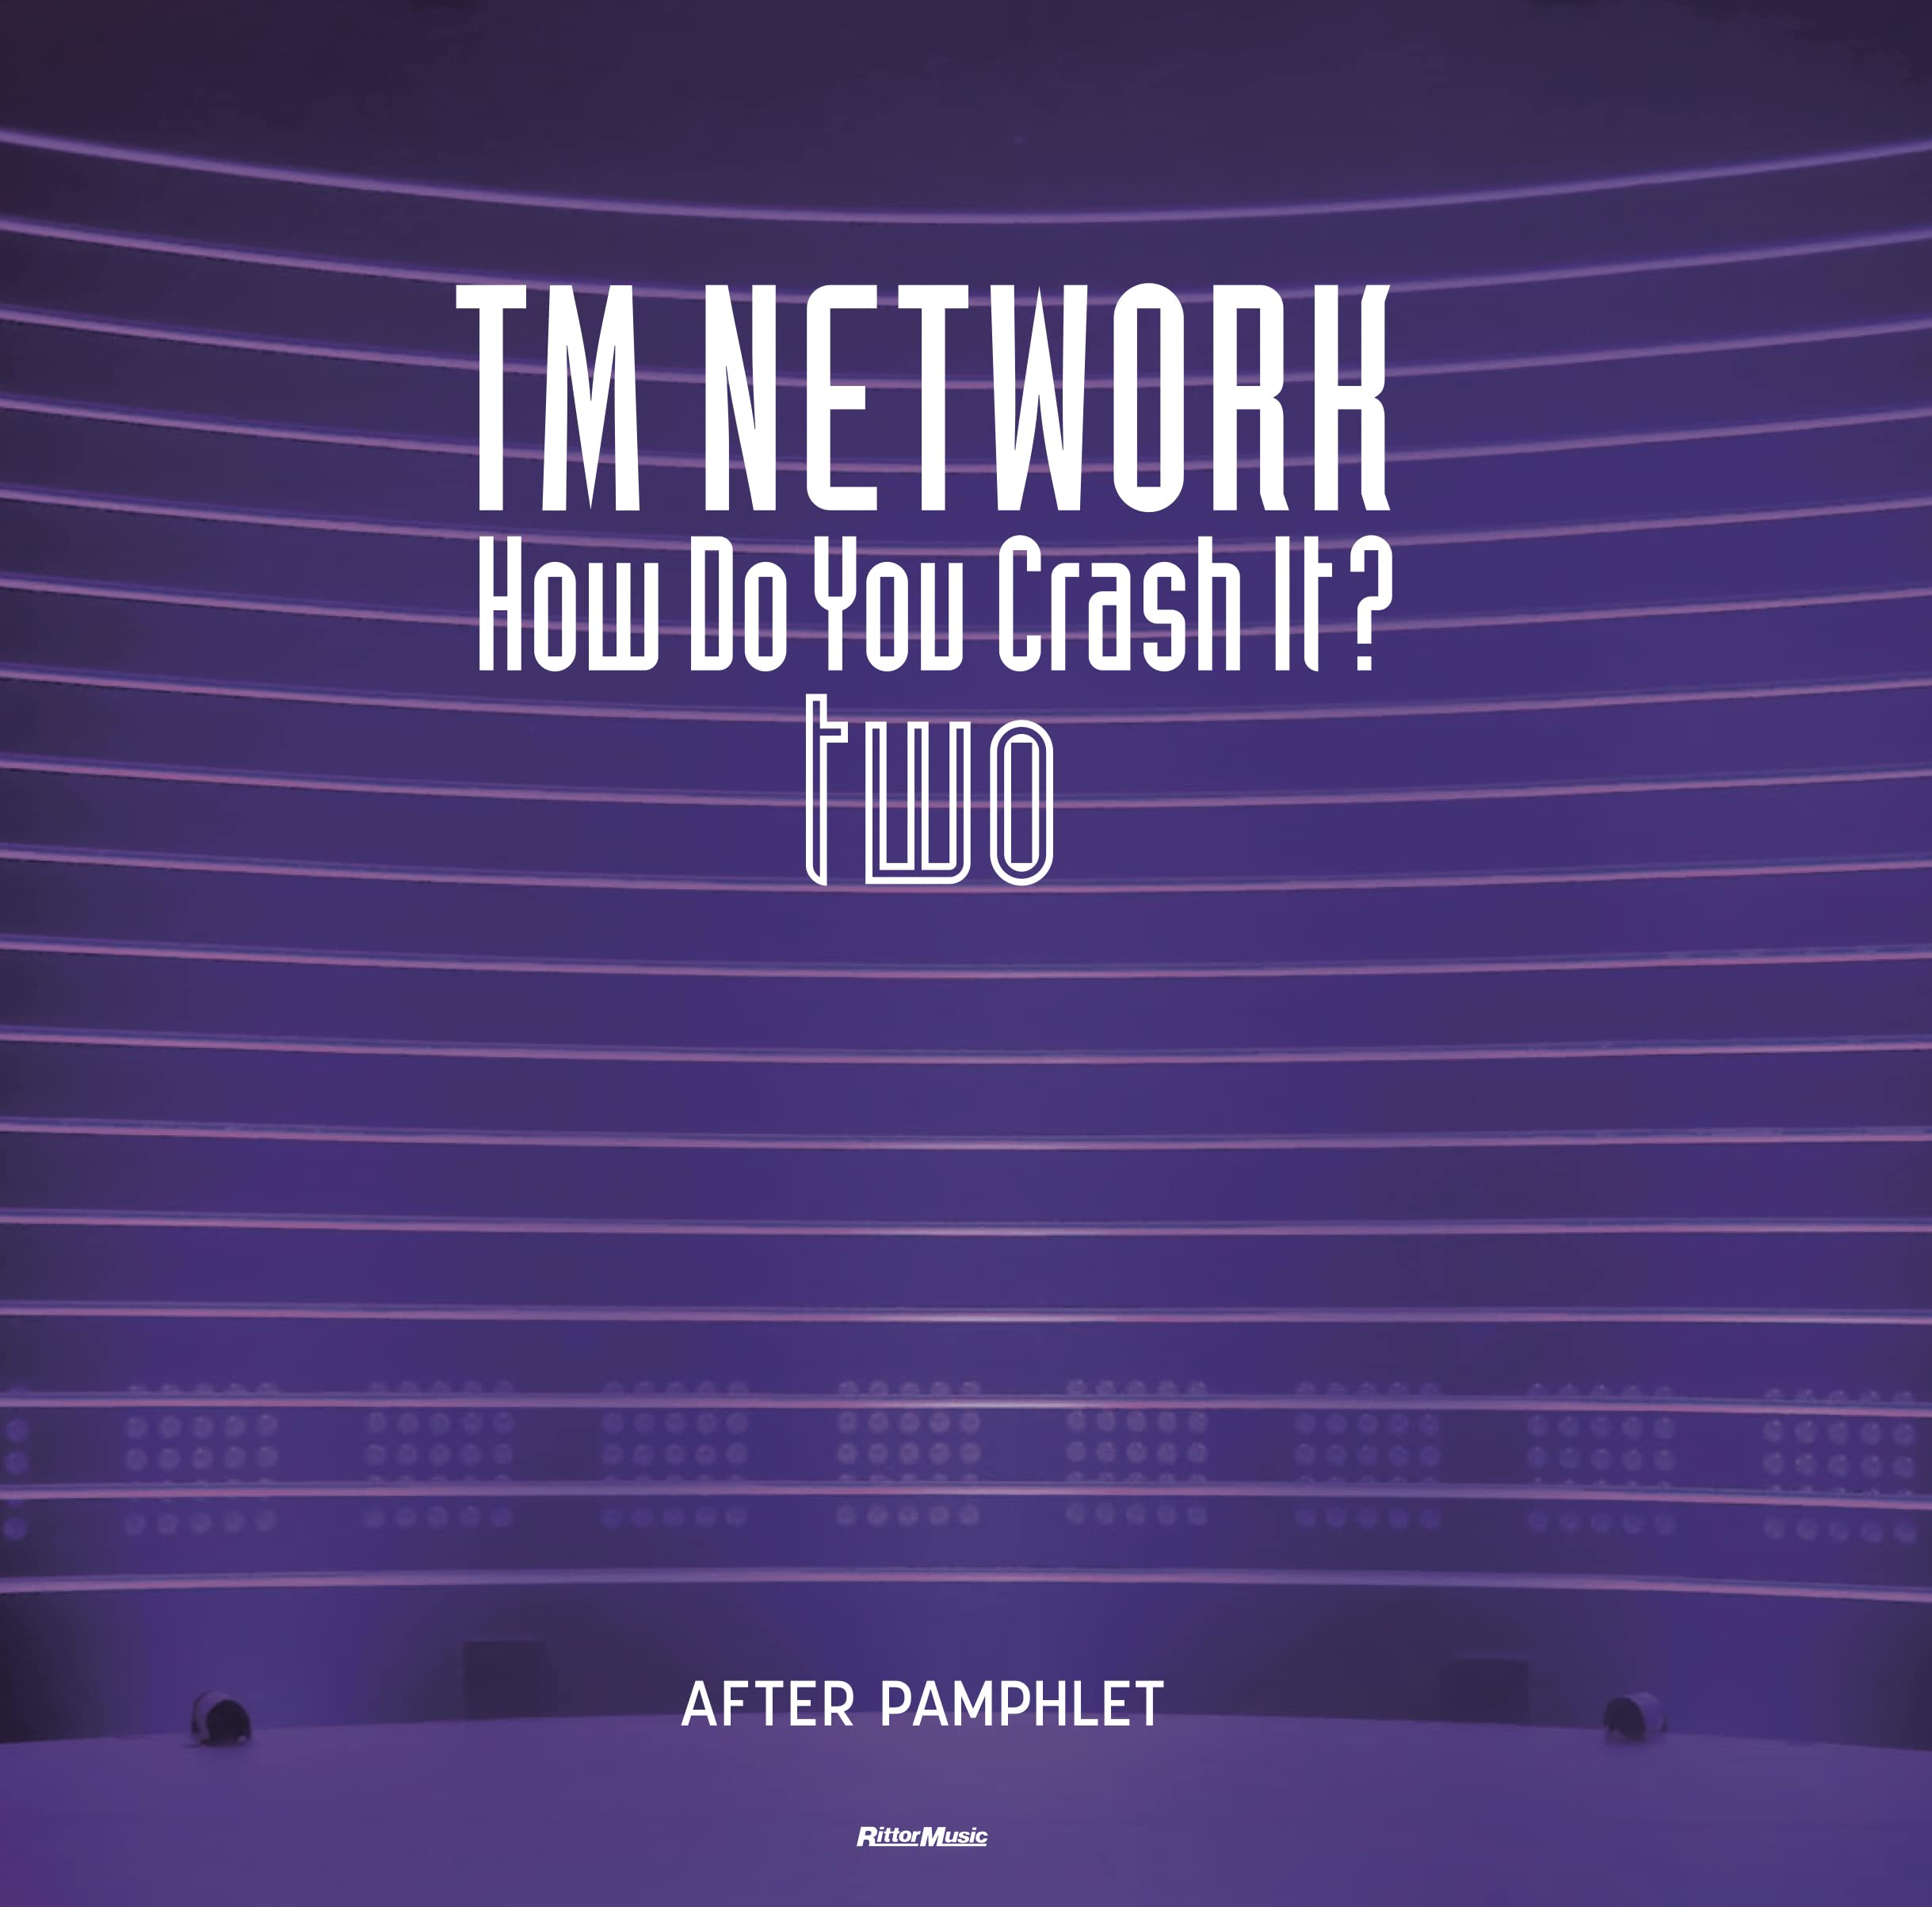 TM NETWORK How Do You Crash It? two AFTER PAMPHLET – Japanese Book Store